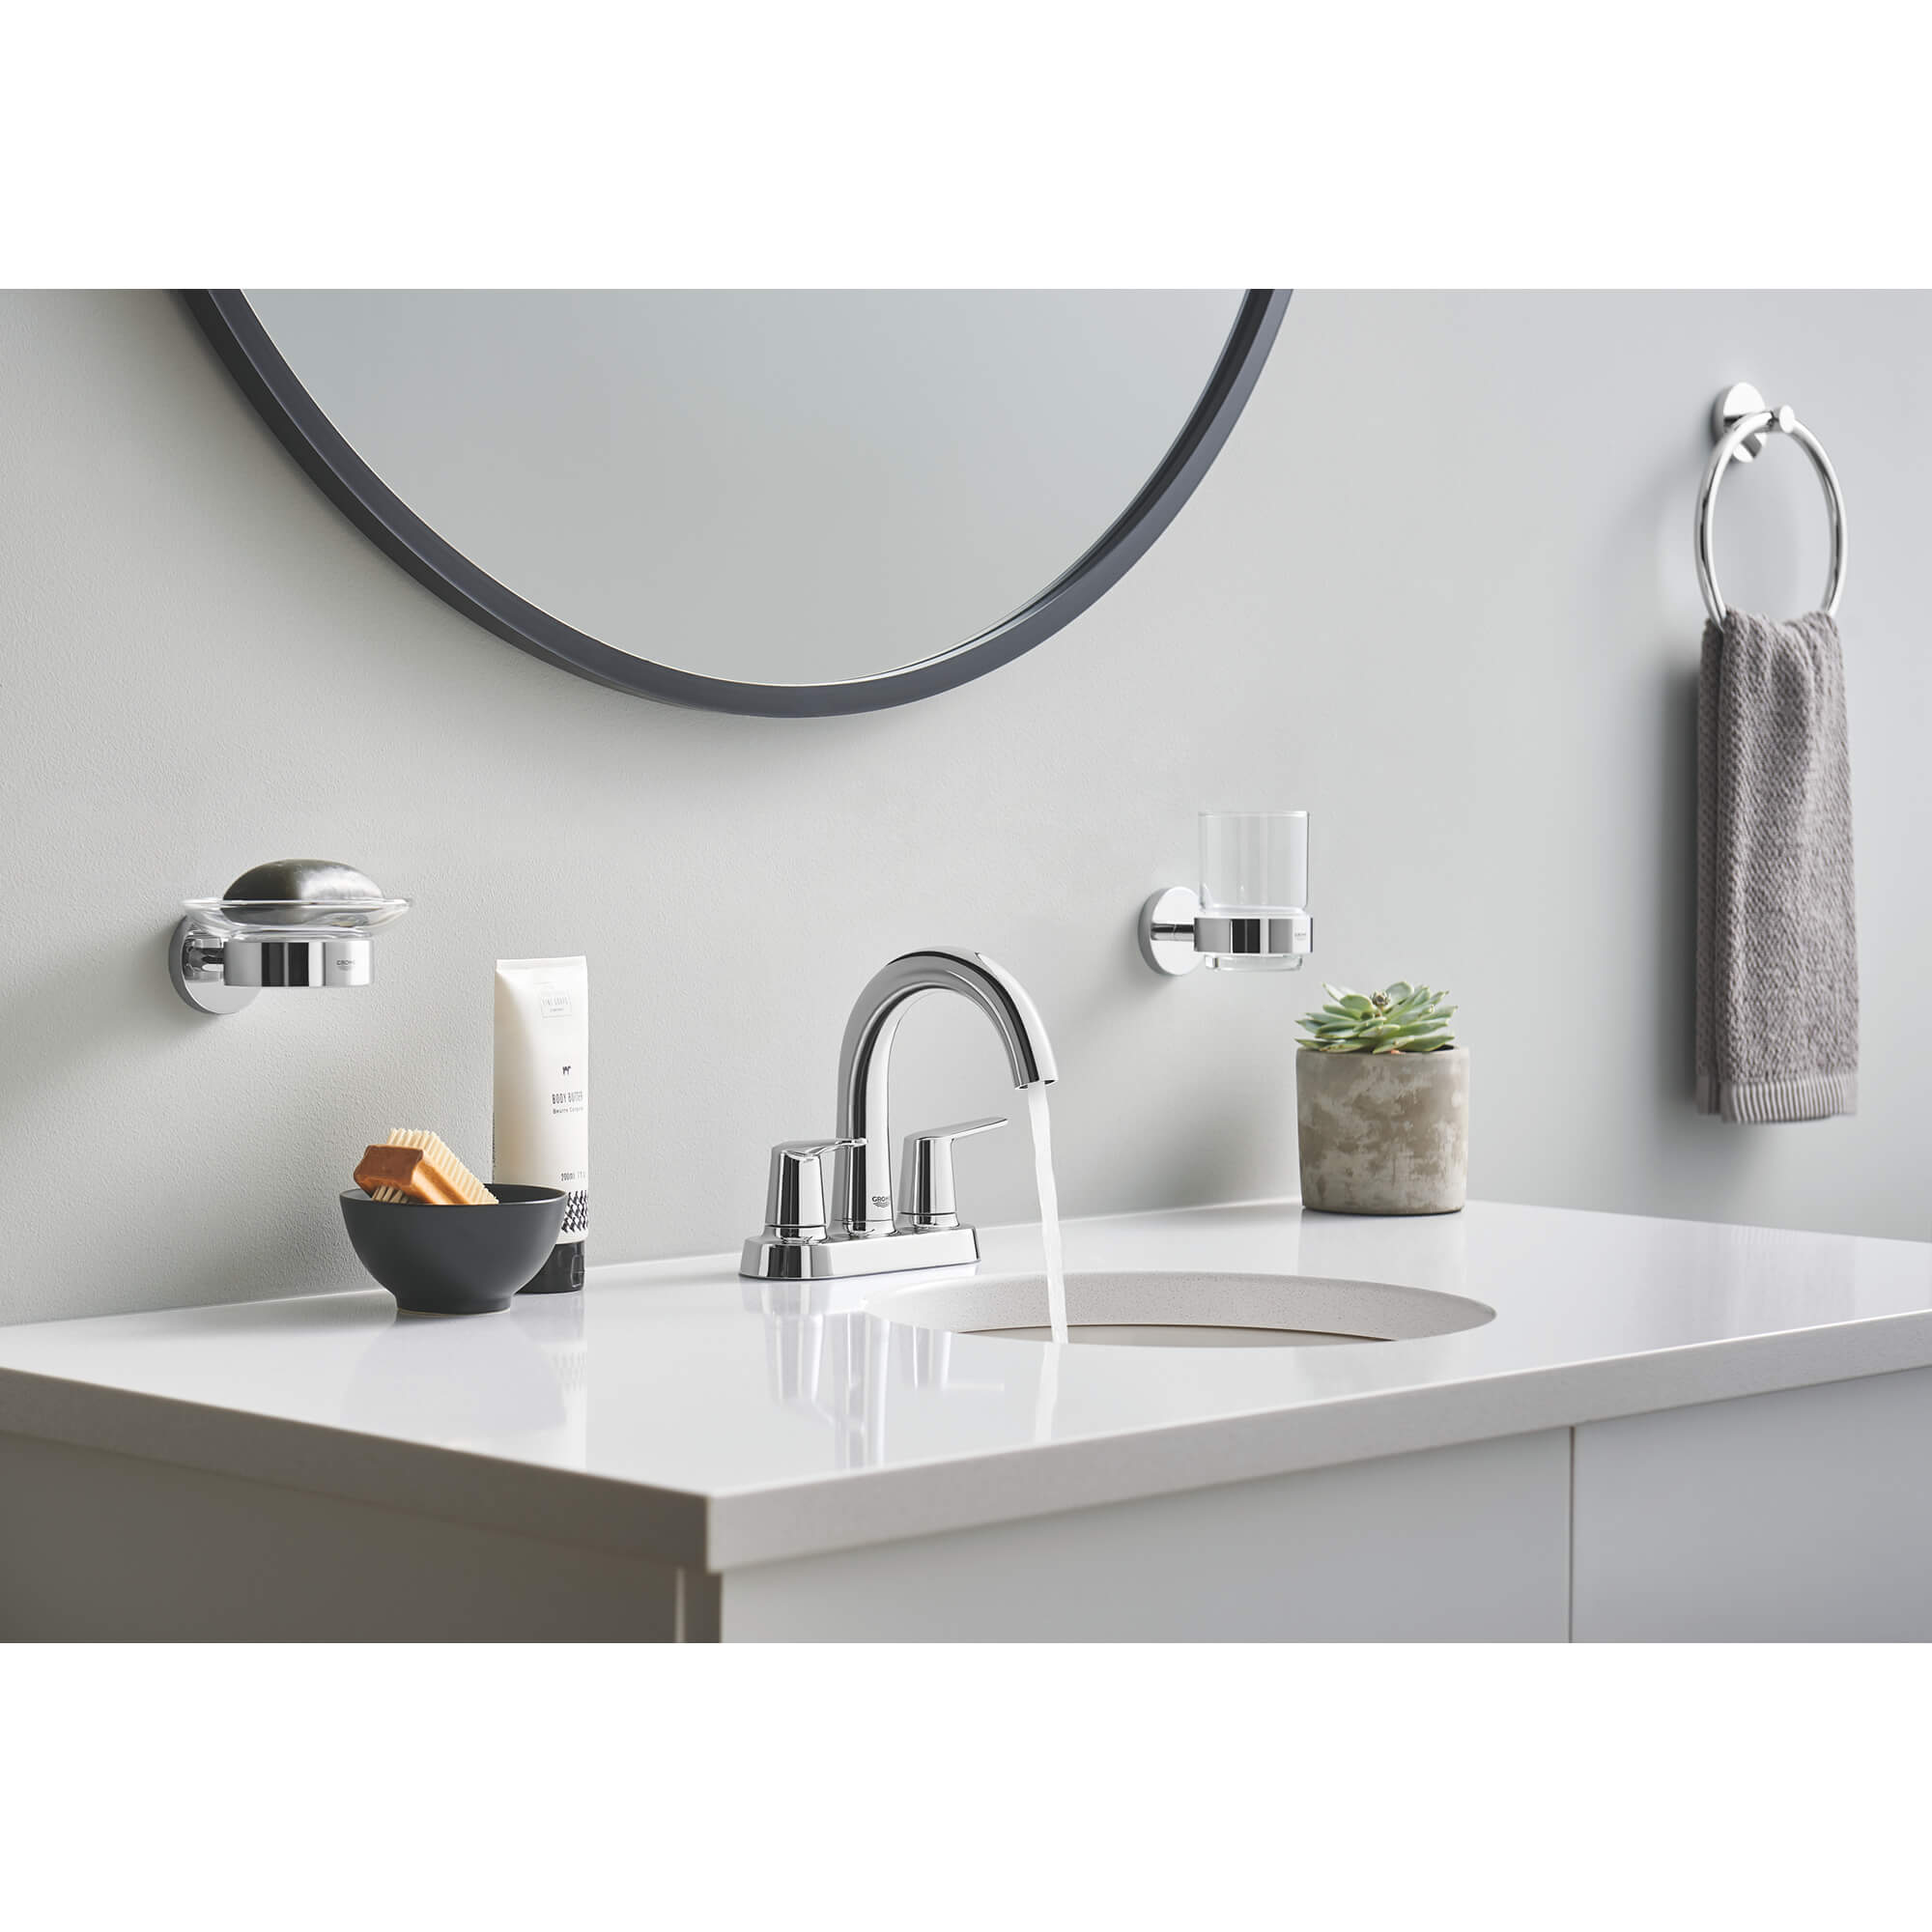 Glass with Holder GROHE CHROME